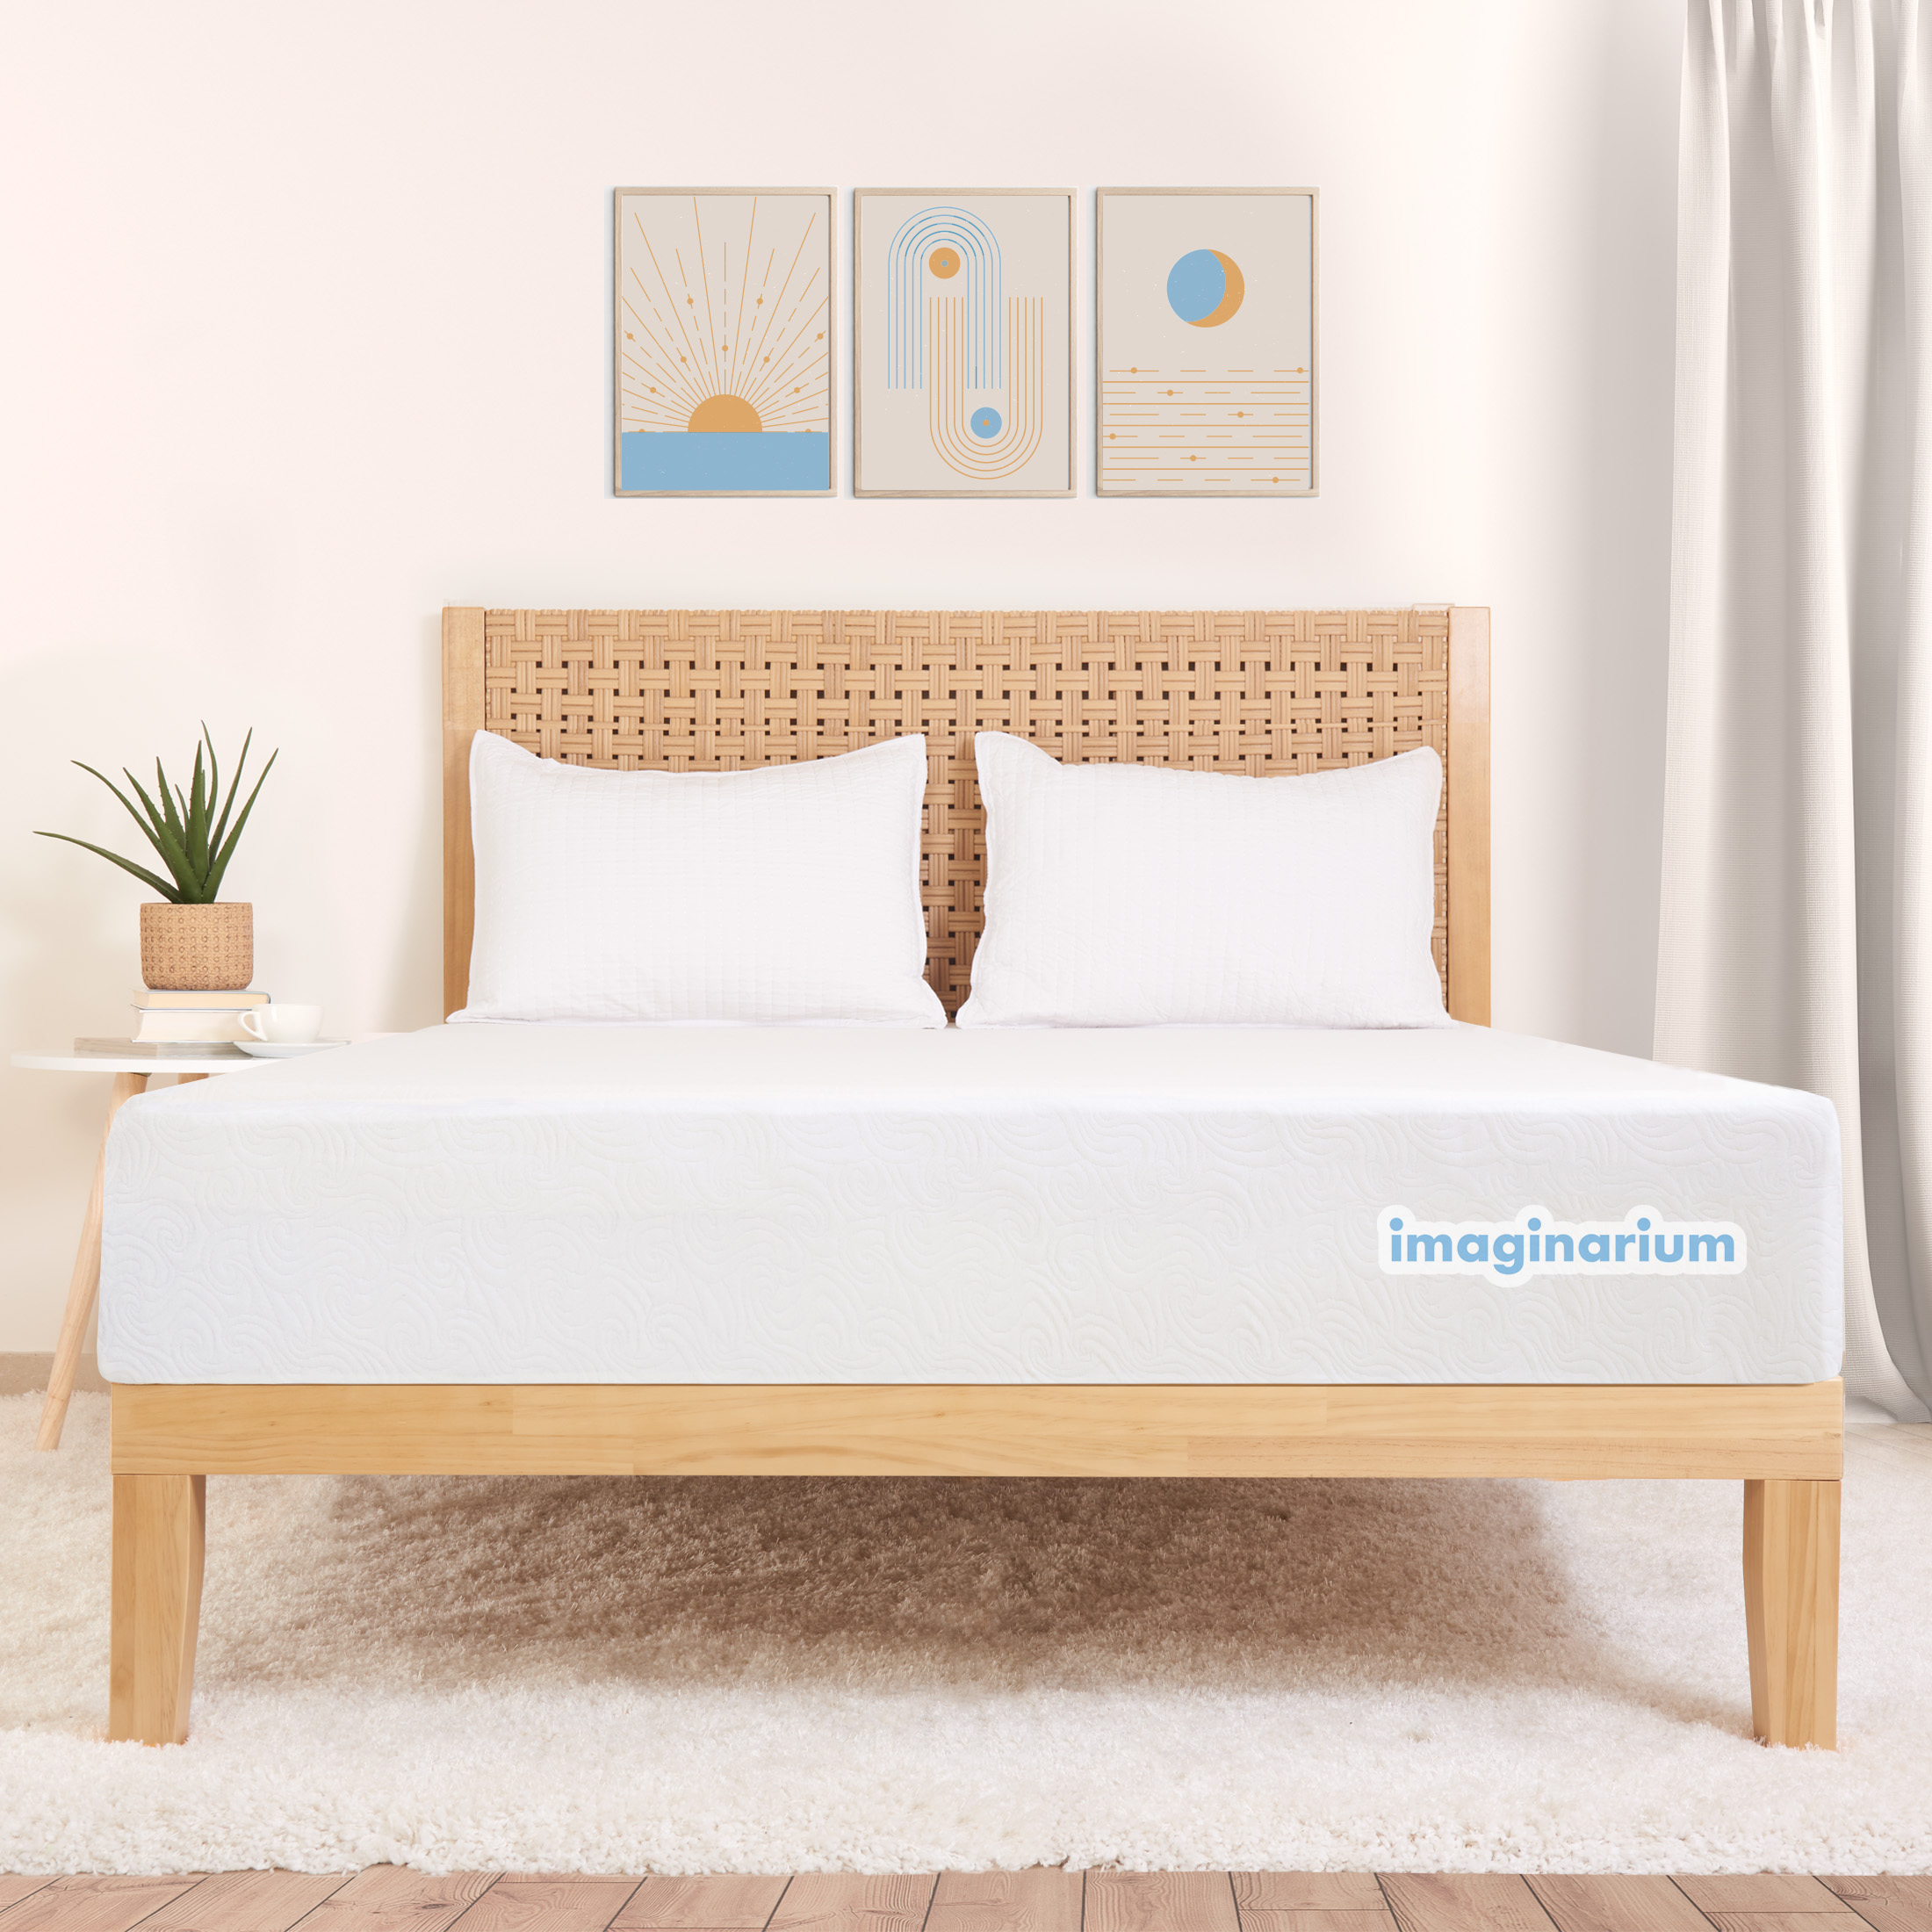 Imaginarium 10" Hybrid of Memory Foam and Coils Mattress with Antimicrobial Treated Cover, King - image 1 of 6